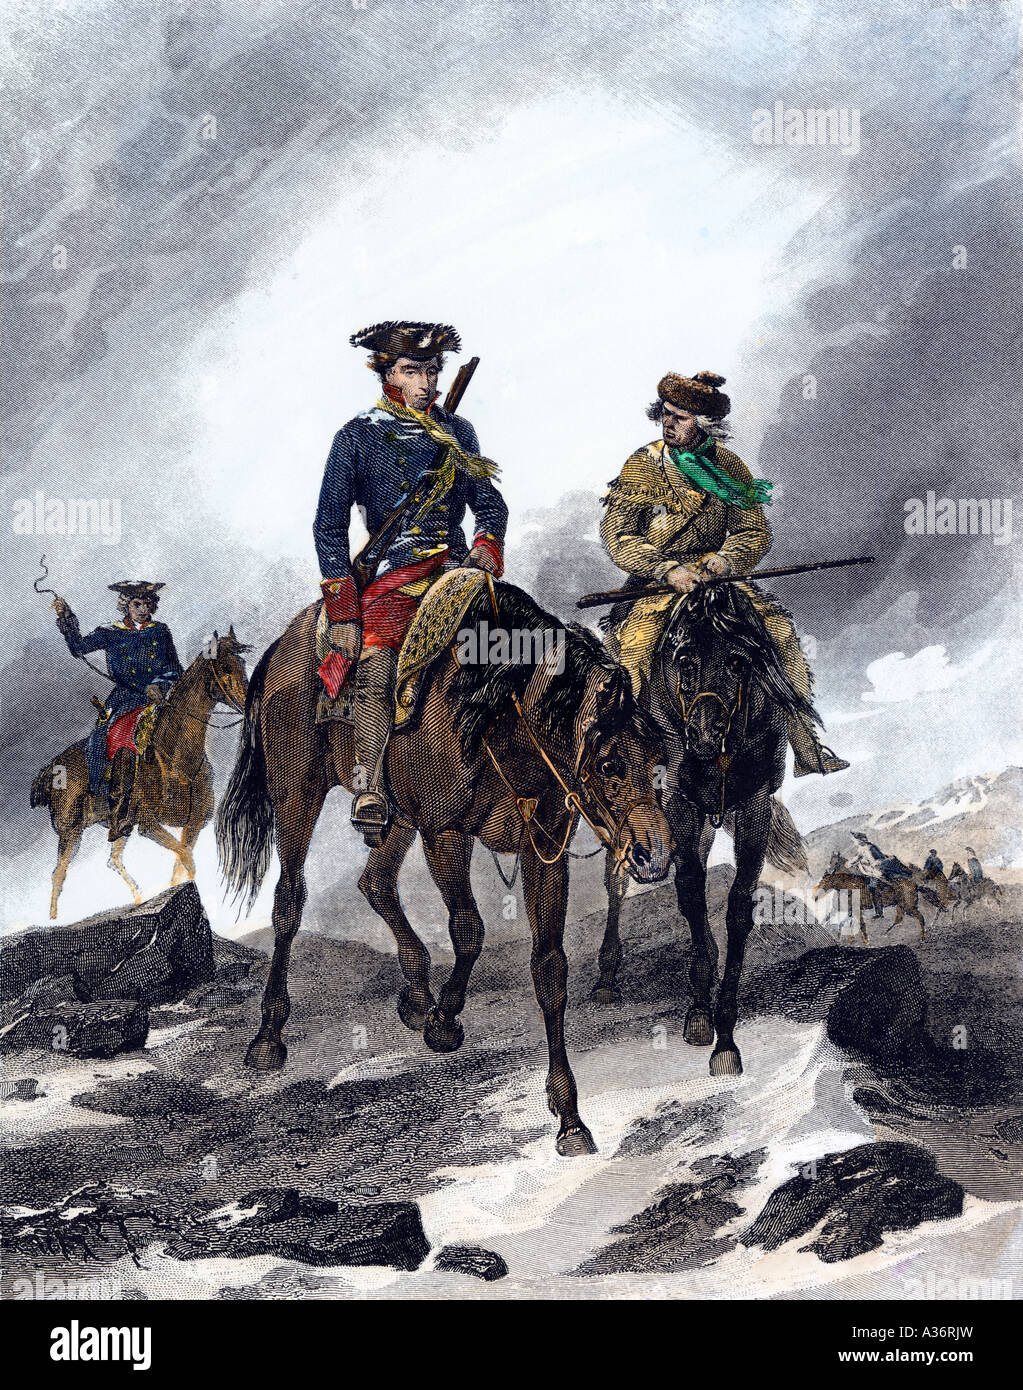 George Washington on a mission to the Ohio River valley during the French and Indian War 1750s. Hand-colored steel engraving Stock Photo